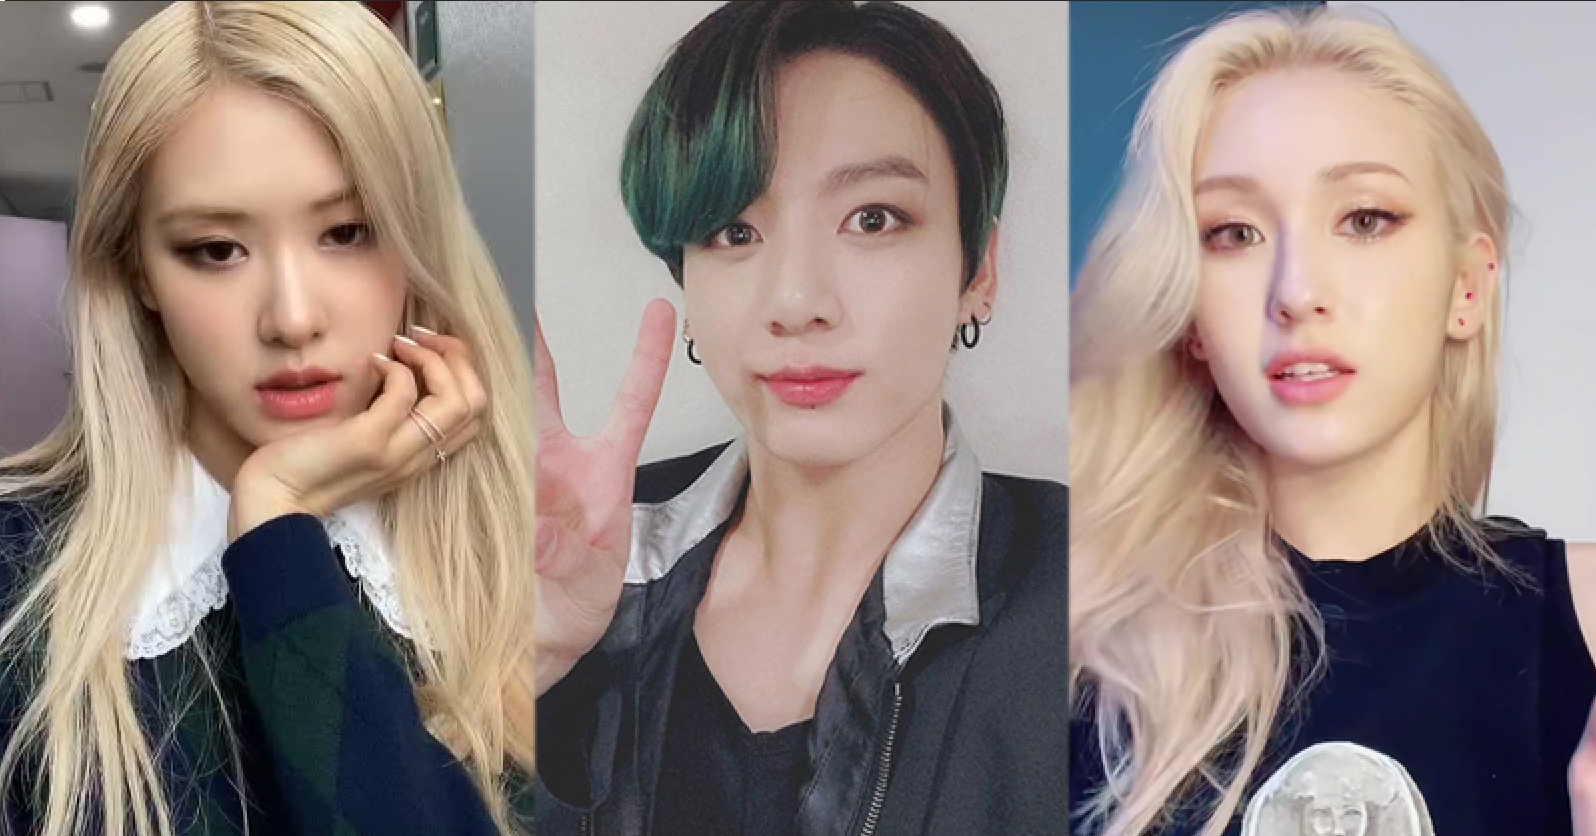 TOP 10 K-Pop Artists With The Most Followers on TikTok